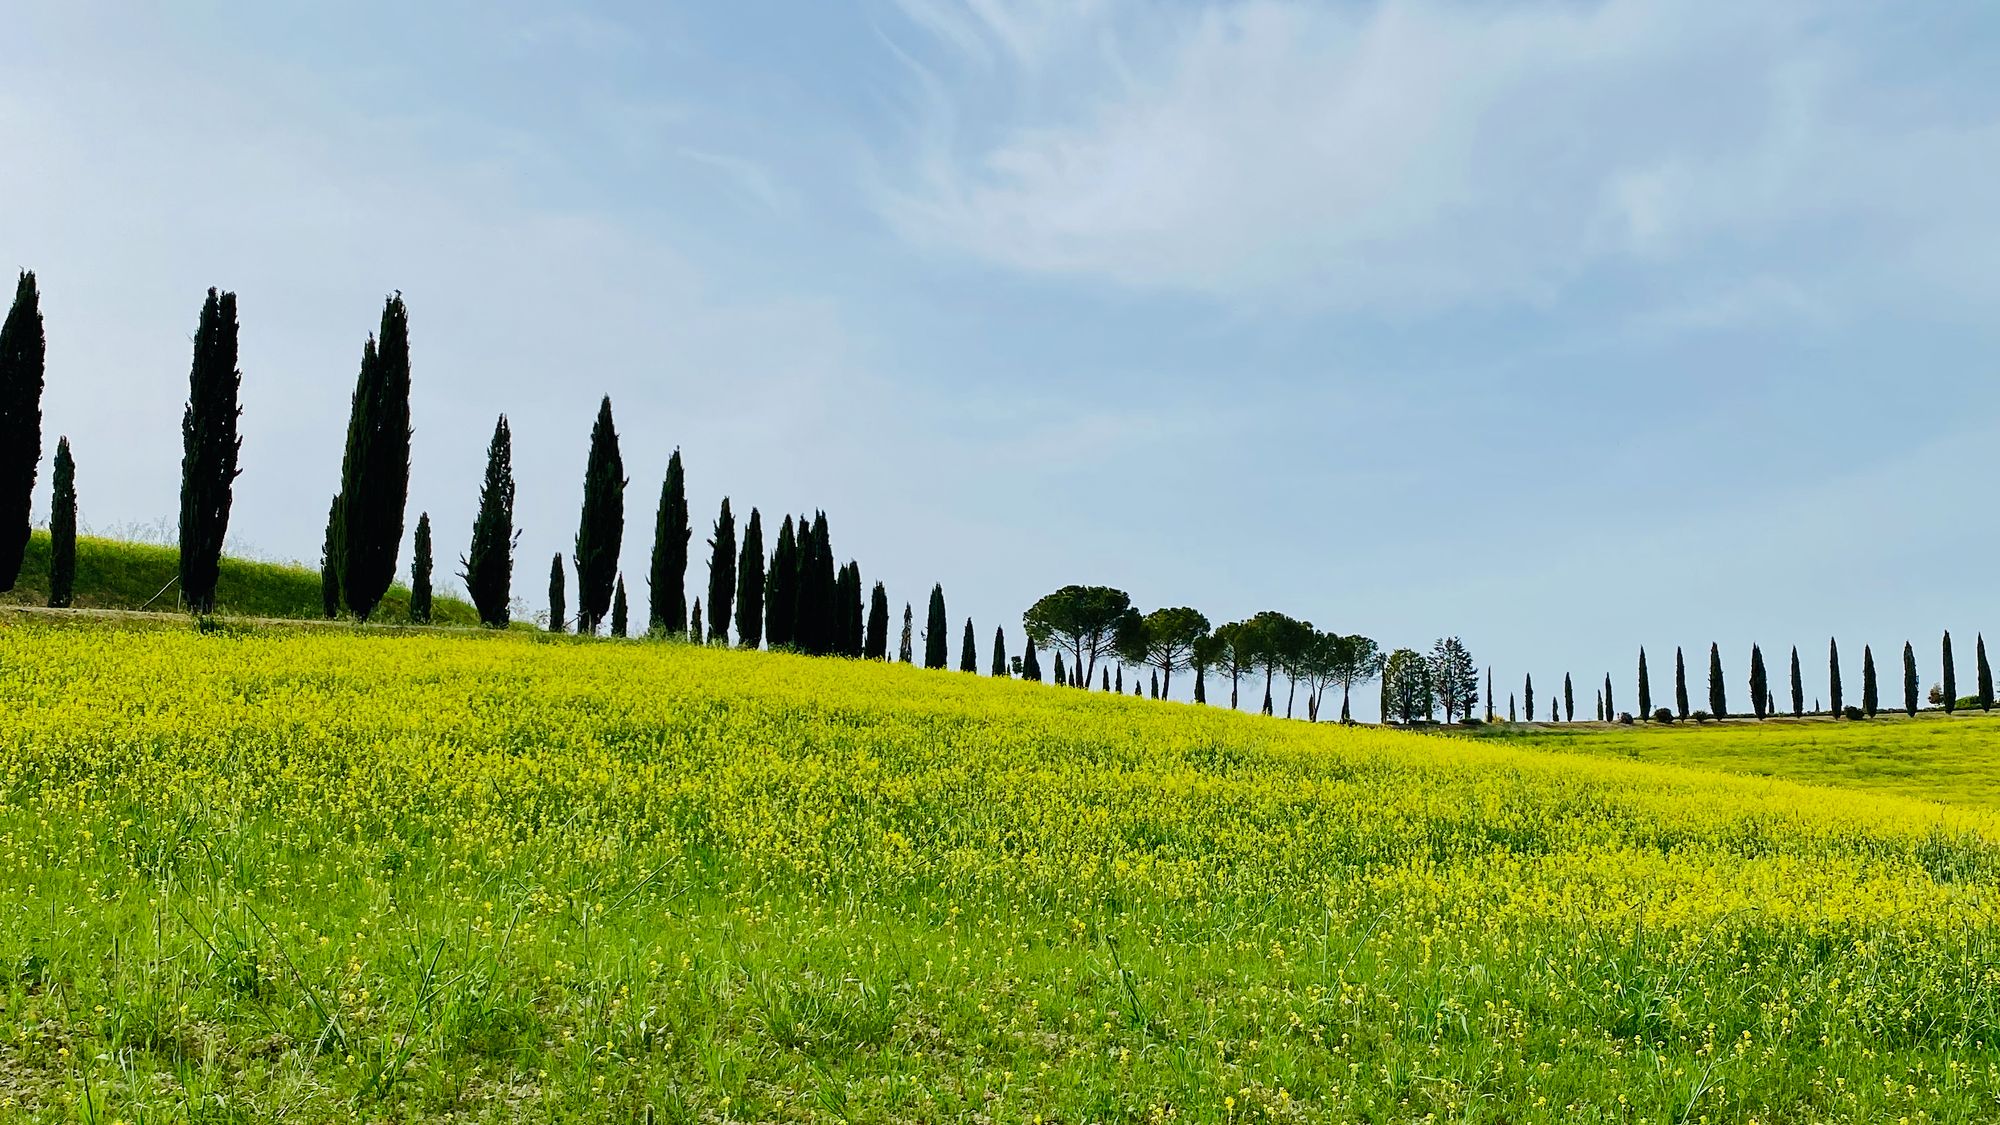 Cypress trees lining the roads of Tuscany